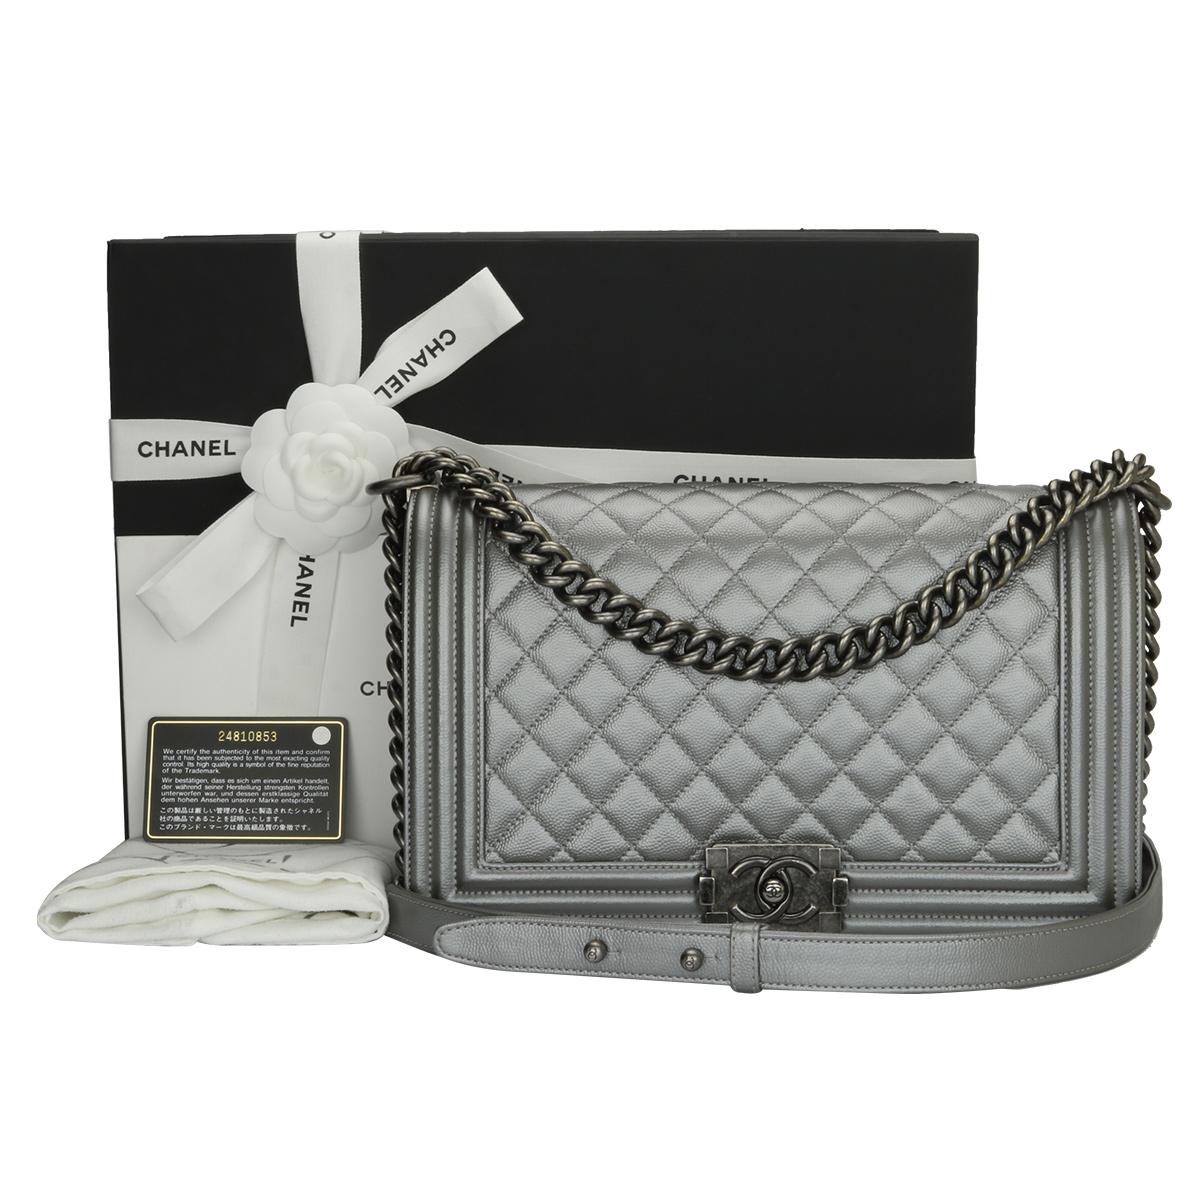 Authentic CHANEL New Medium Quilted Boy Silver Grey Caviar with Ruthenium Hardware 2018.

This stunning bag is still in a mint condition; it still keeps its original shape and the hardware still very shiny, leather smells fresh as if new.

Exterior